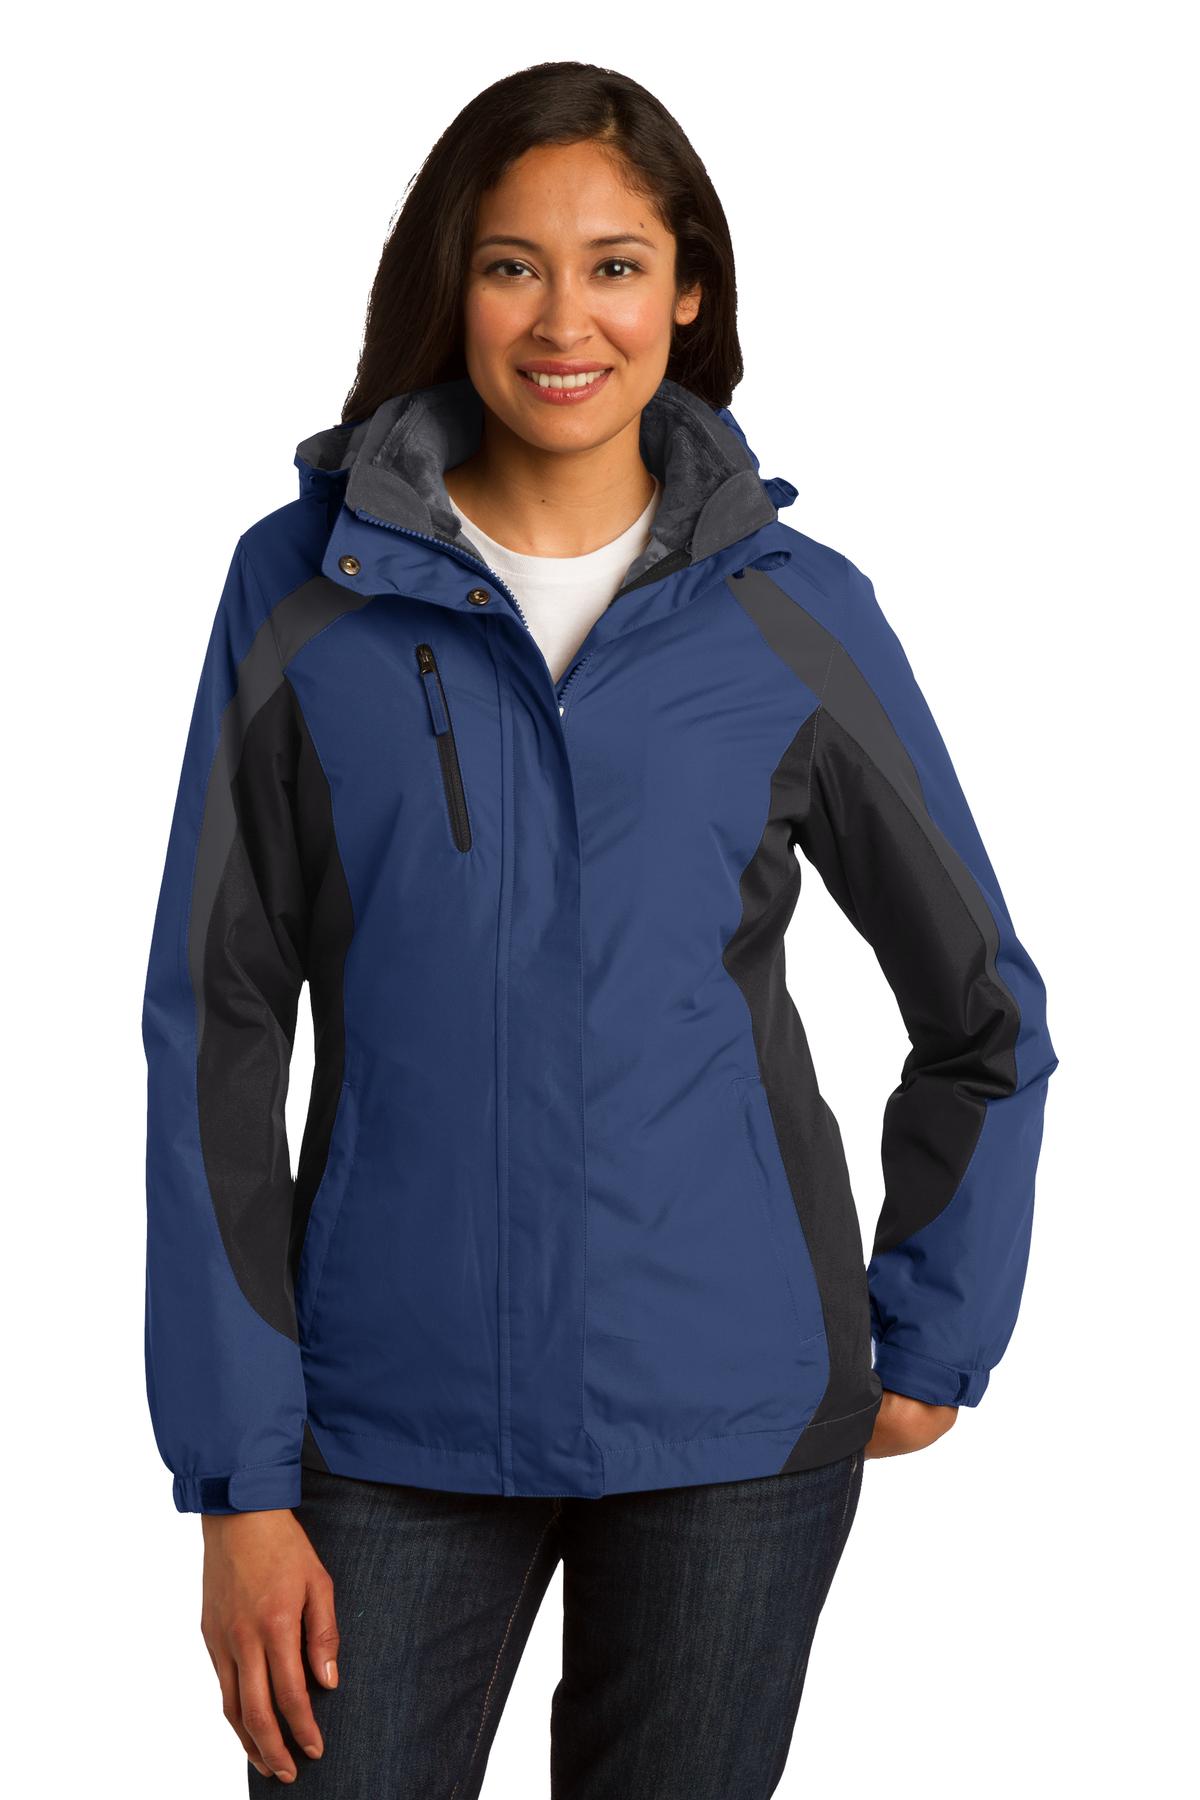 Port Authority Ladies Colorblock 3 in 1 Jacket-S (Admiral Blue/ Black/ Magnet Grey) - image 1 of 5